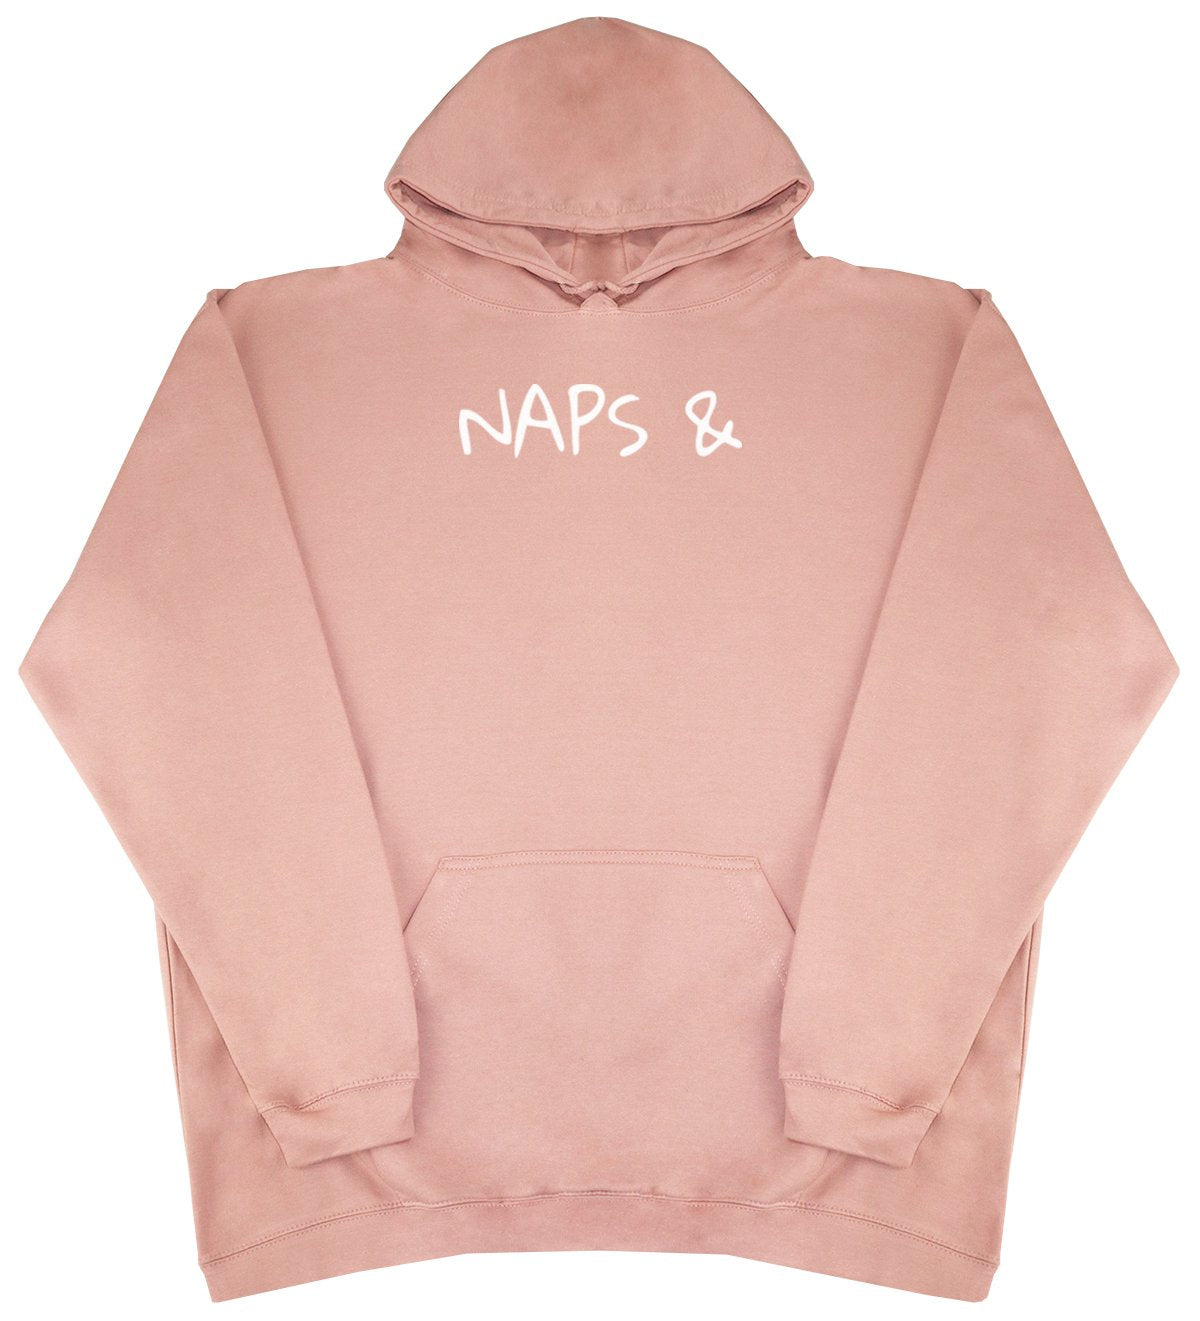 PERSONALISED Naps & - New Style - Huge Size - Oversized Comfy Hoody